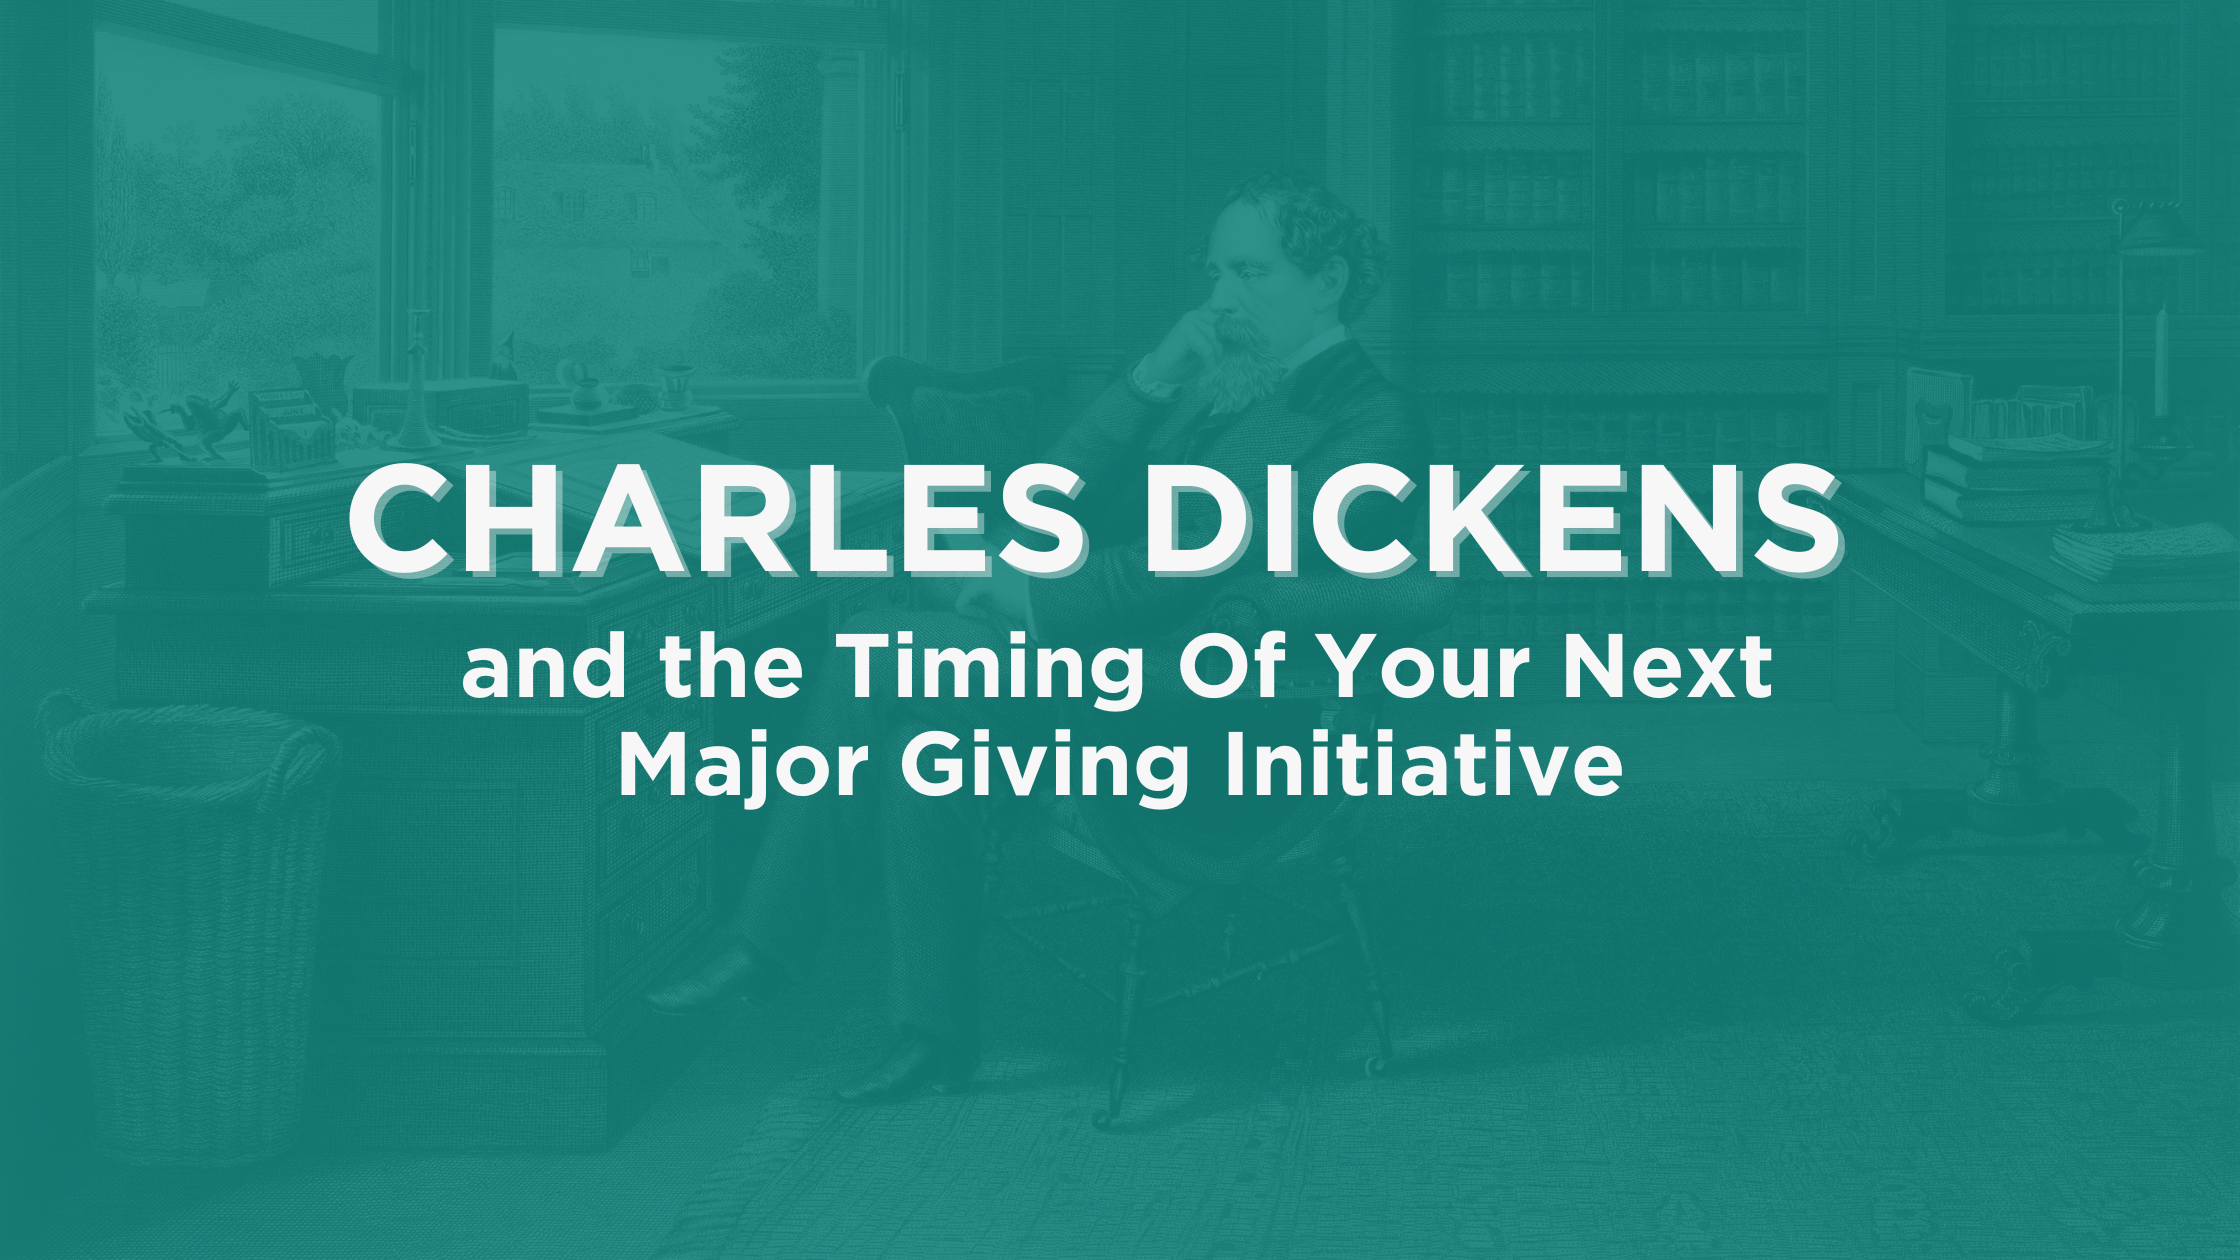 5 Essentials to planning and implementing a successful major giving initiative.